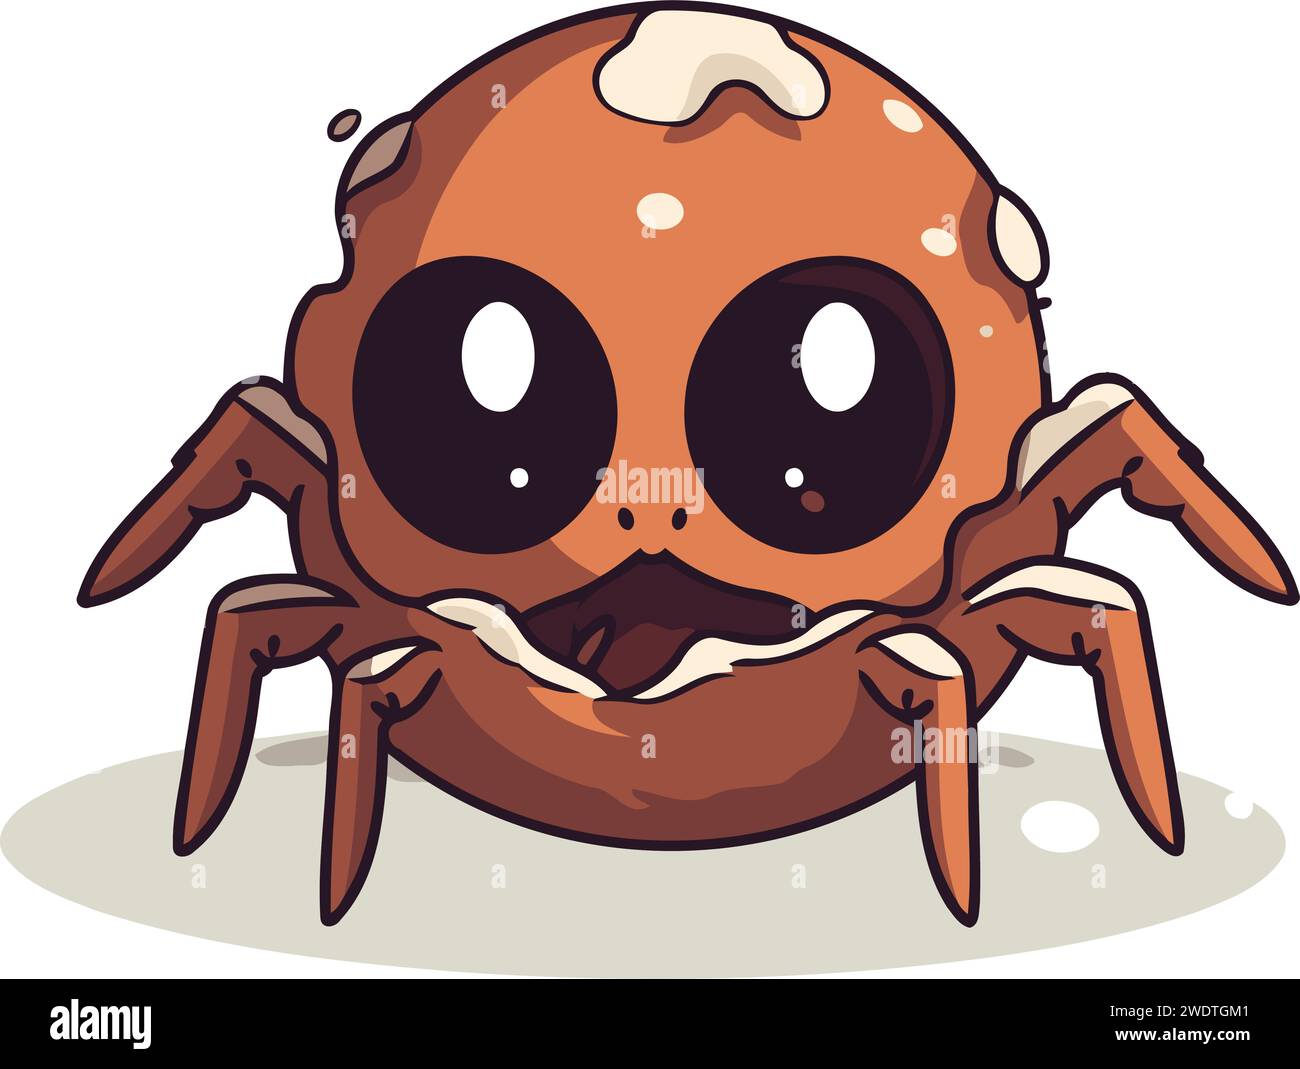 Cute cartoon spider isolated on white background. Vector illustration for your design Stock Vector